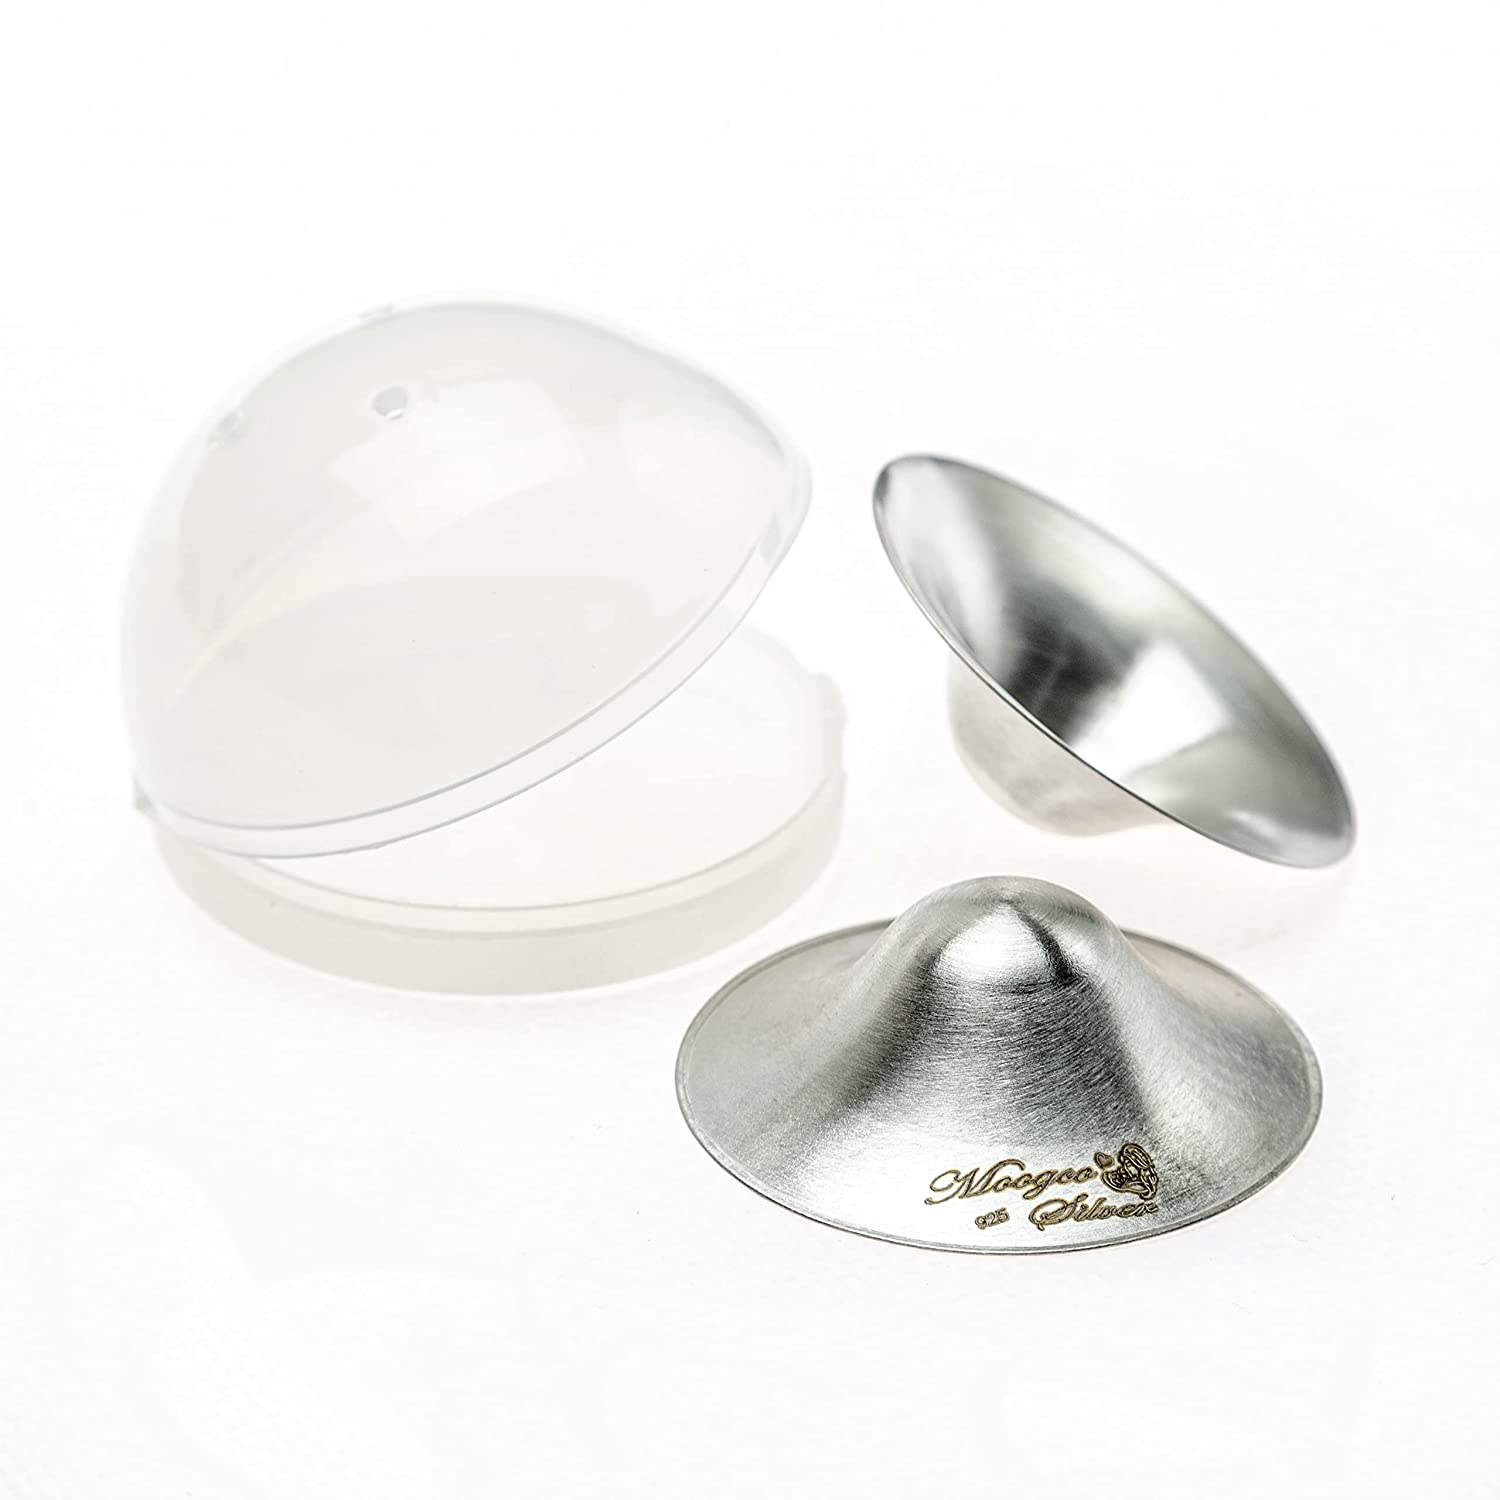 How to Use Silverette® nursing cups